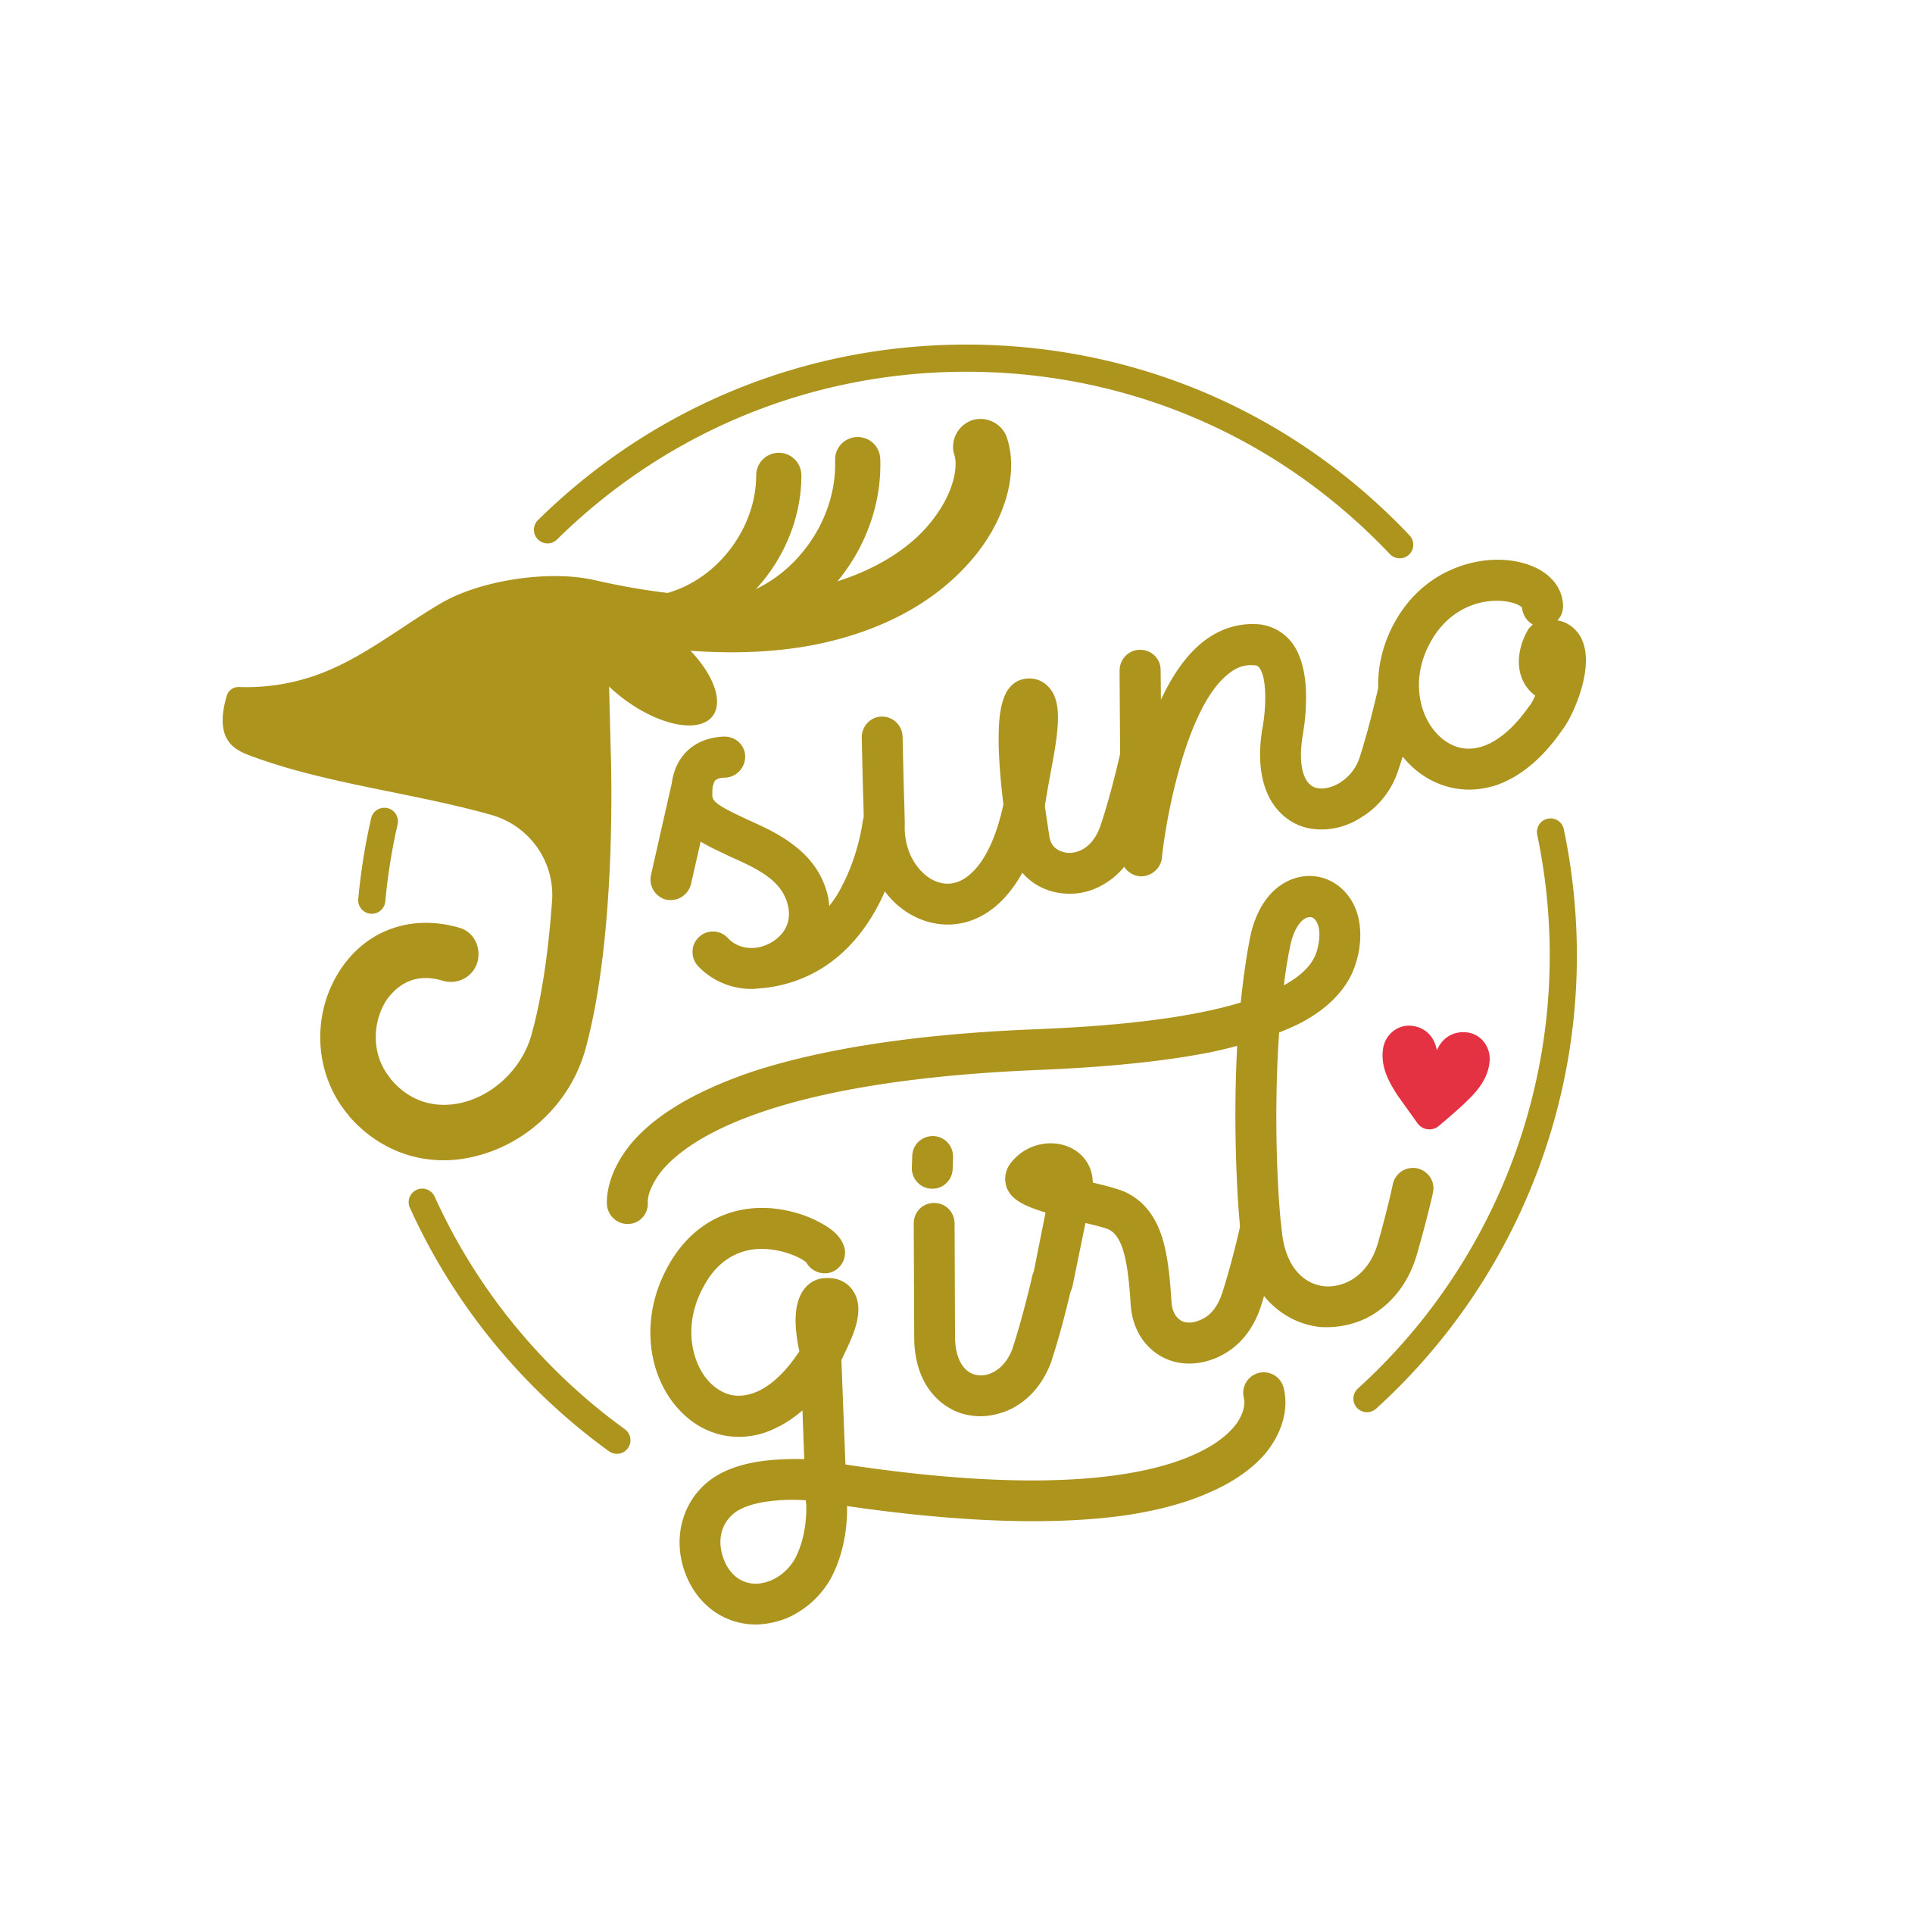 tsuno girl logo design by logo designer ASOBOAD for your inspiration and for the worlds largest logo competition